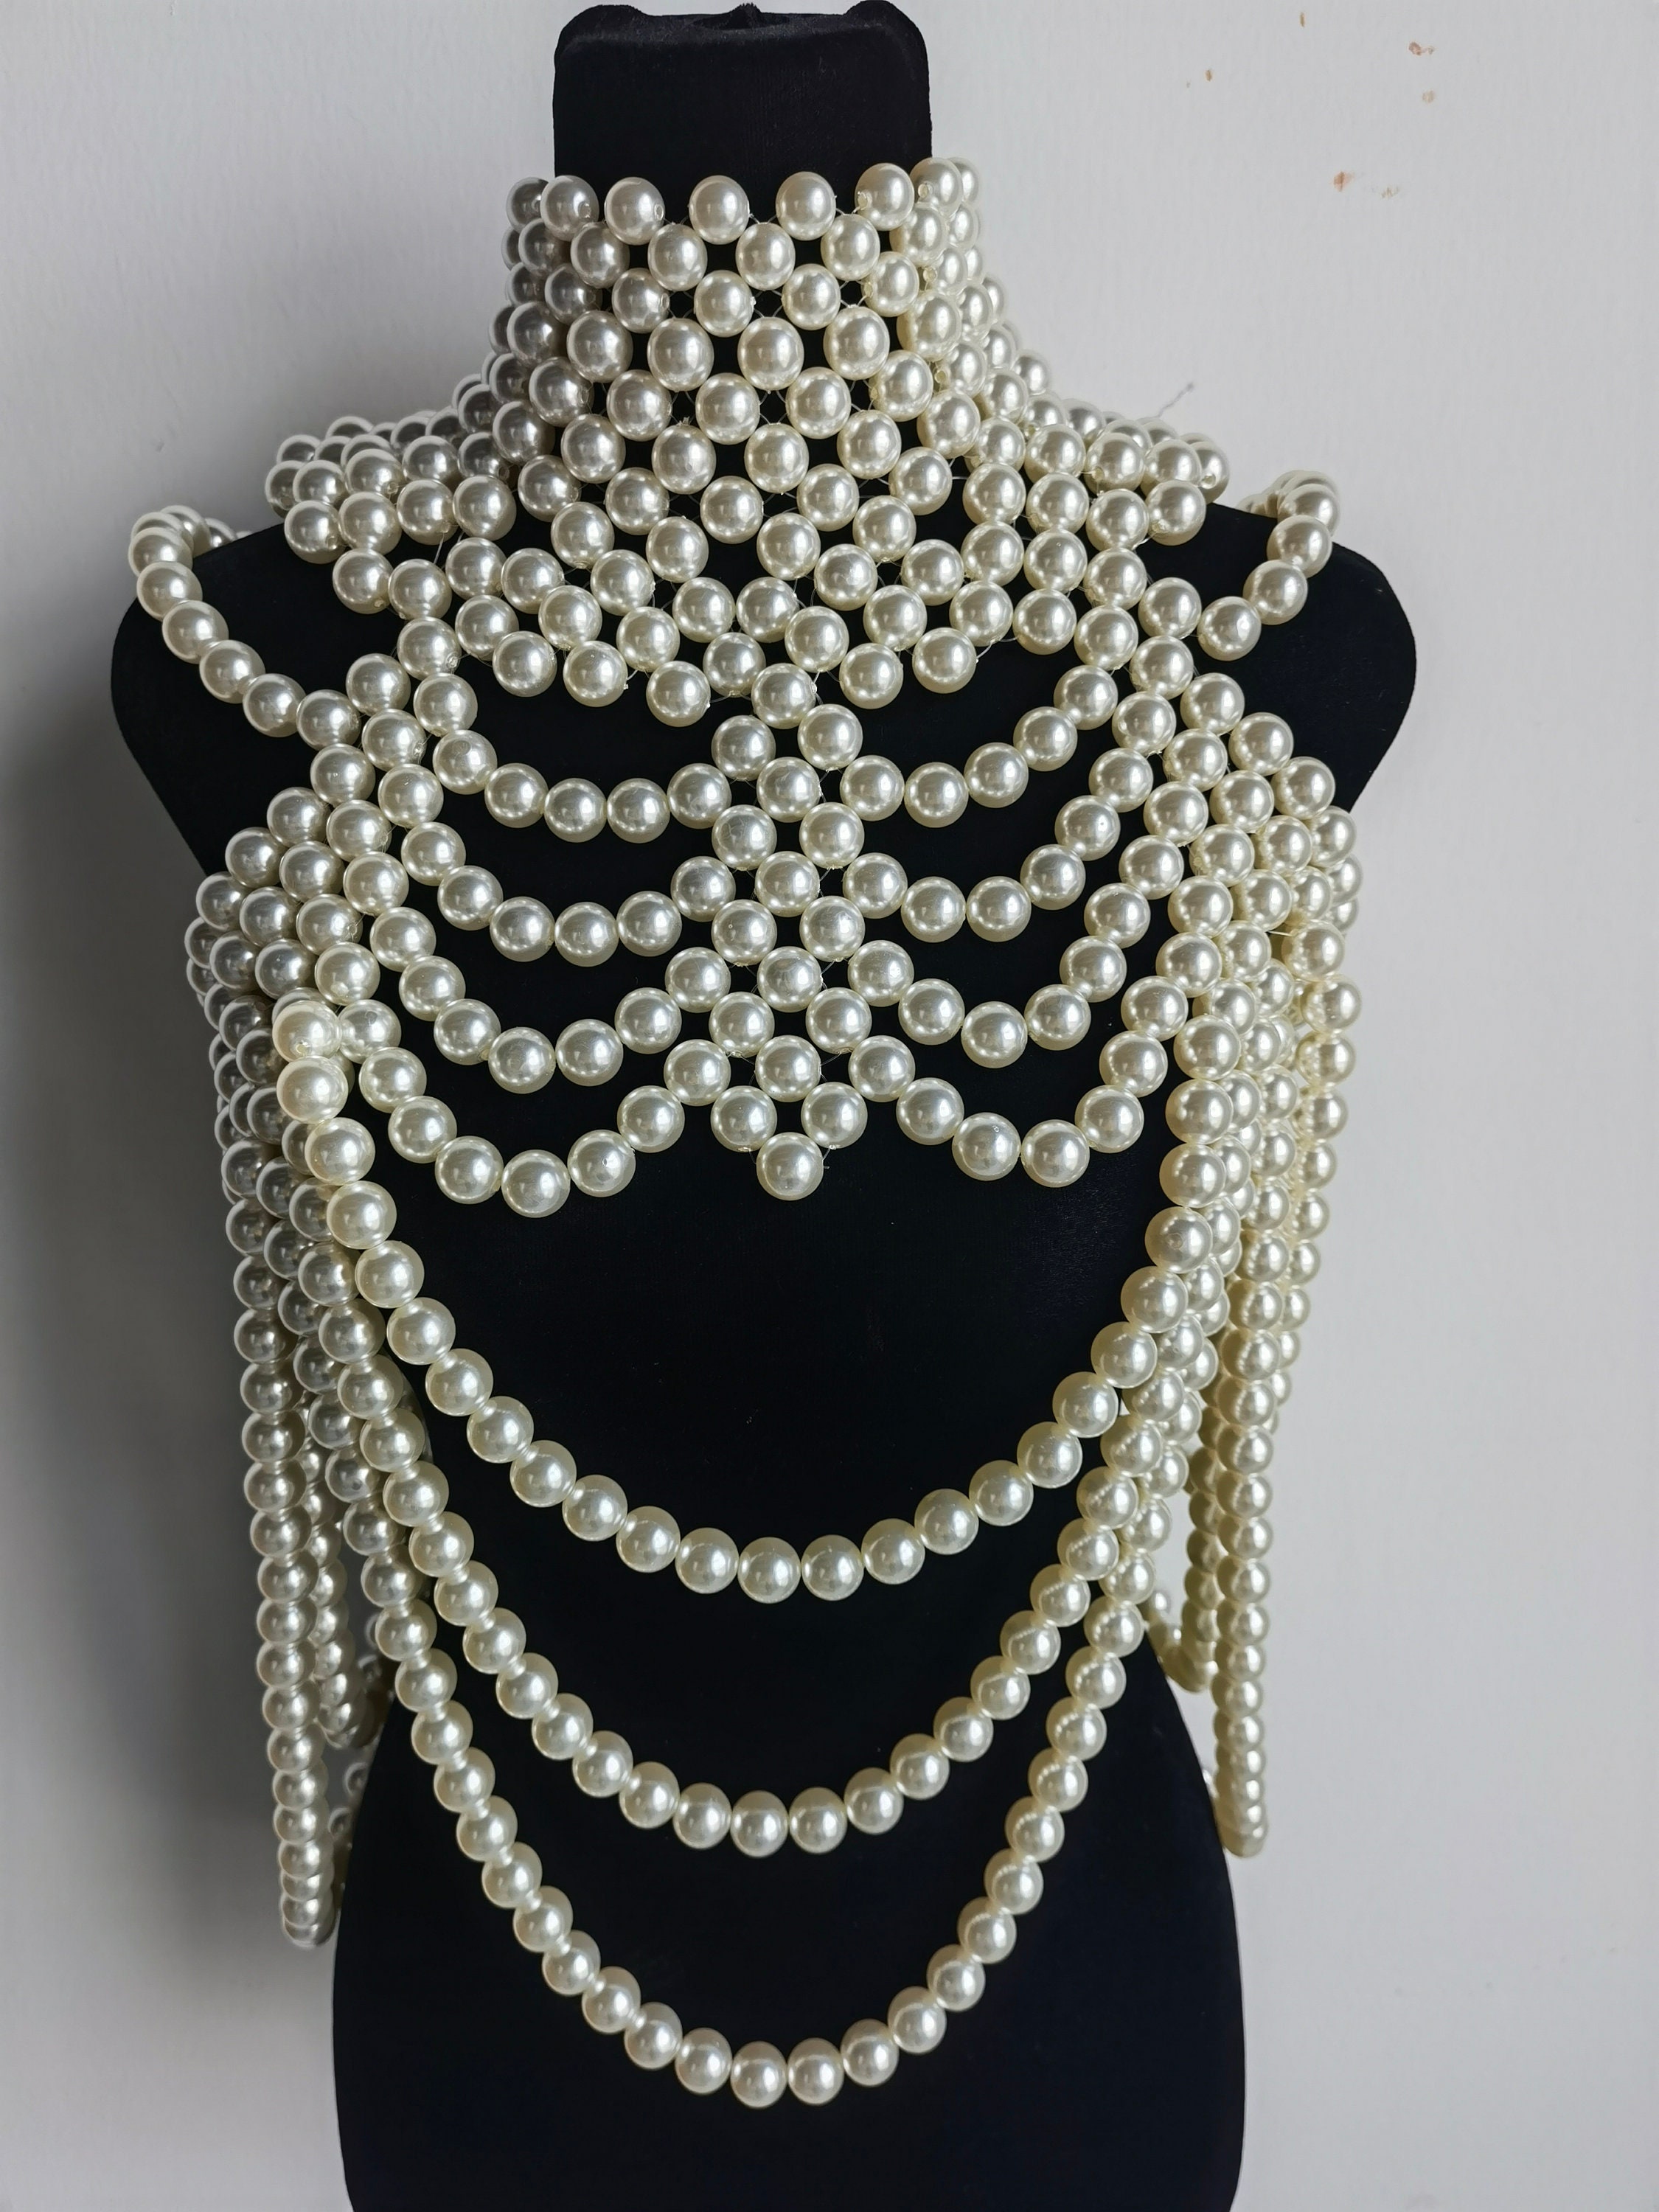 Vintage Fashion Oversized Statement Faux Pearl Necklace Cream Champagne  Color | eBay